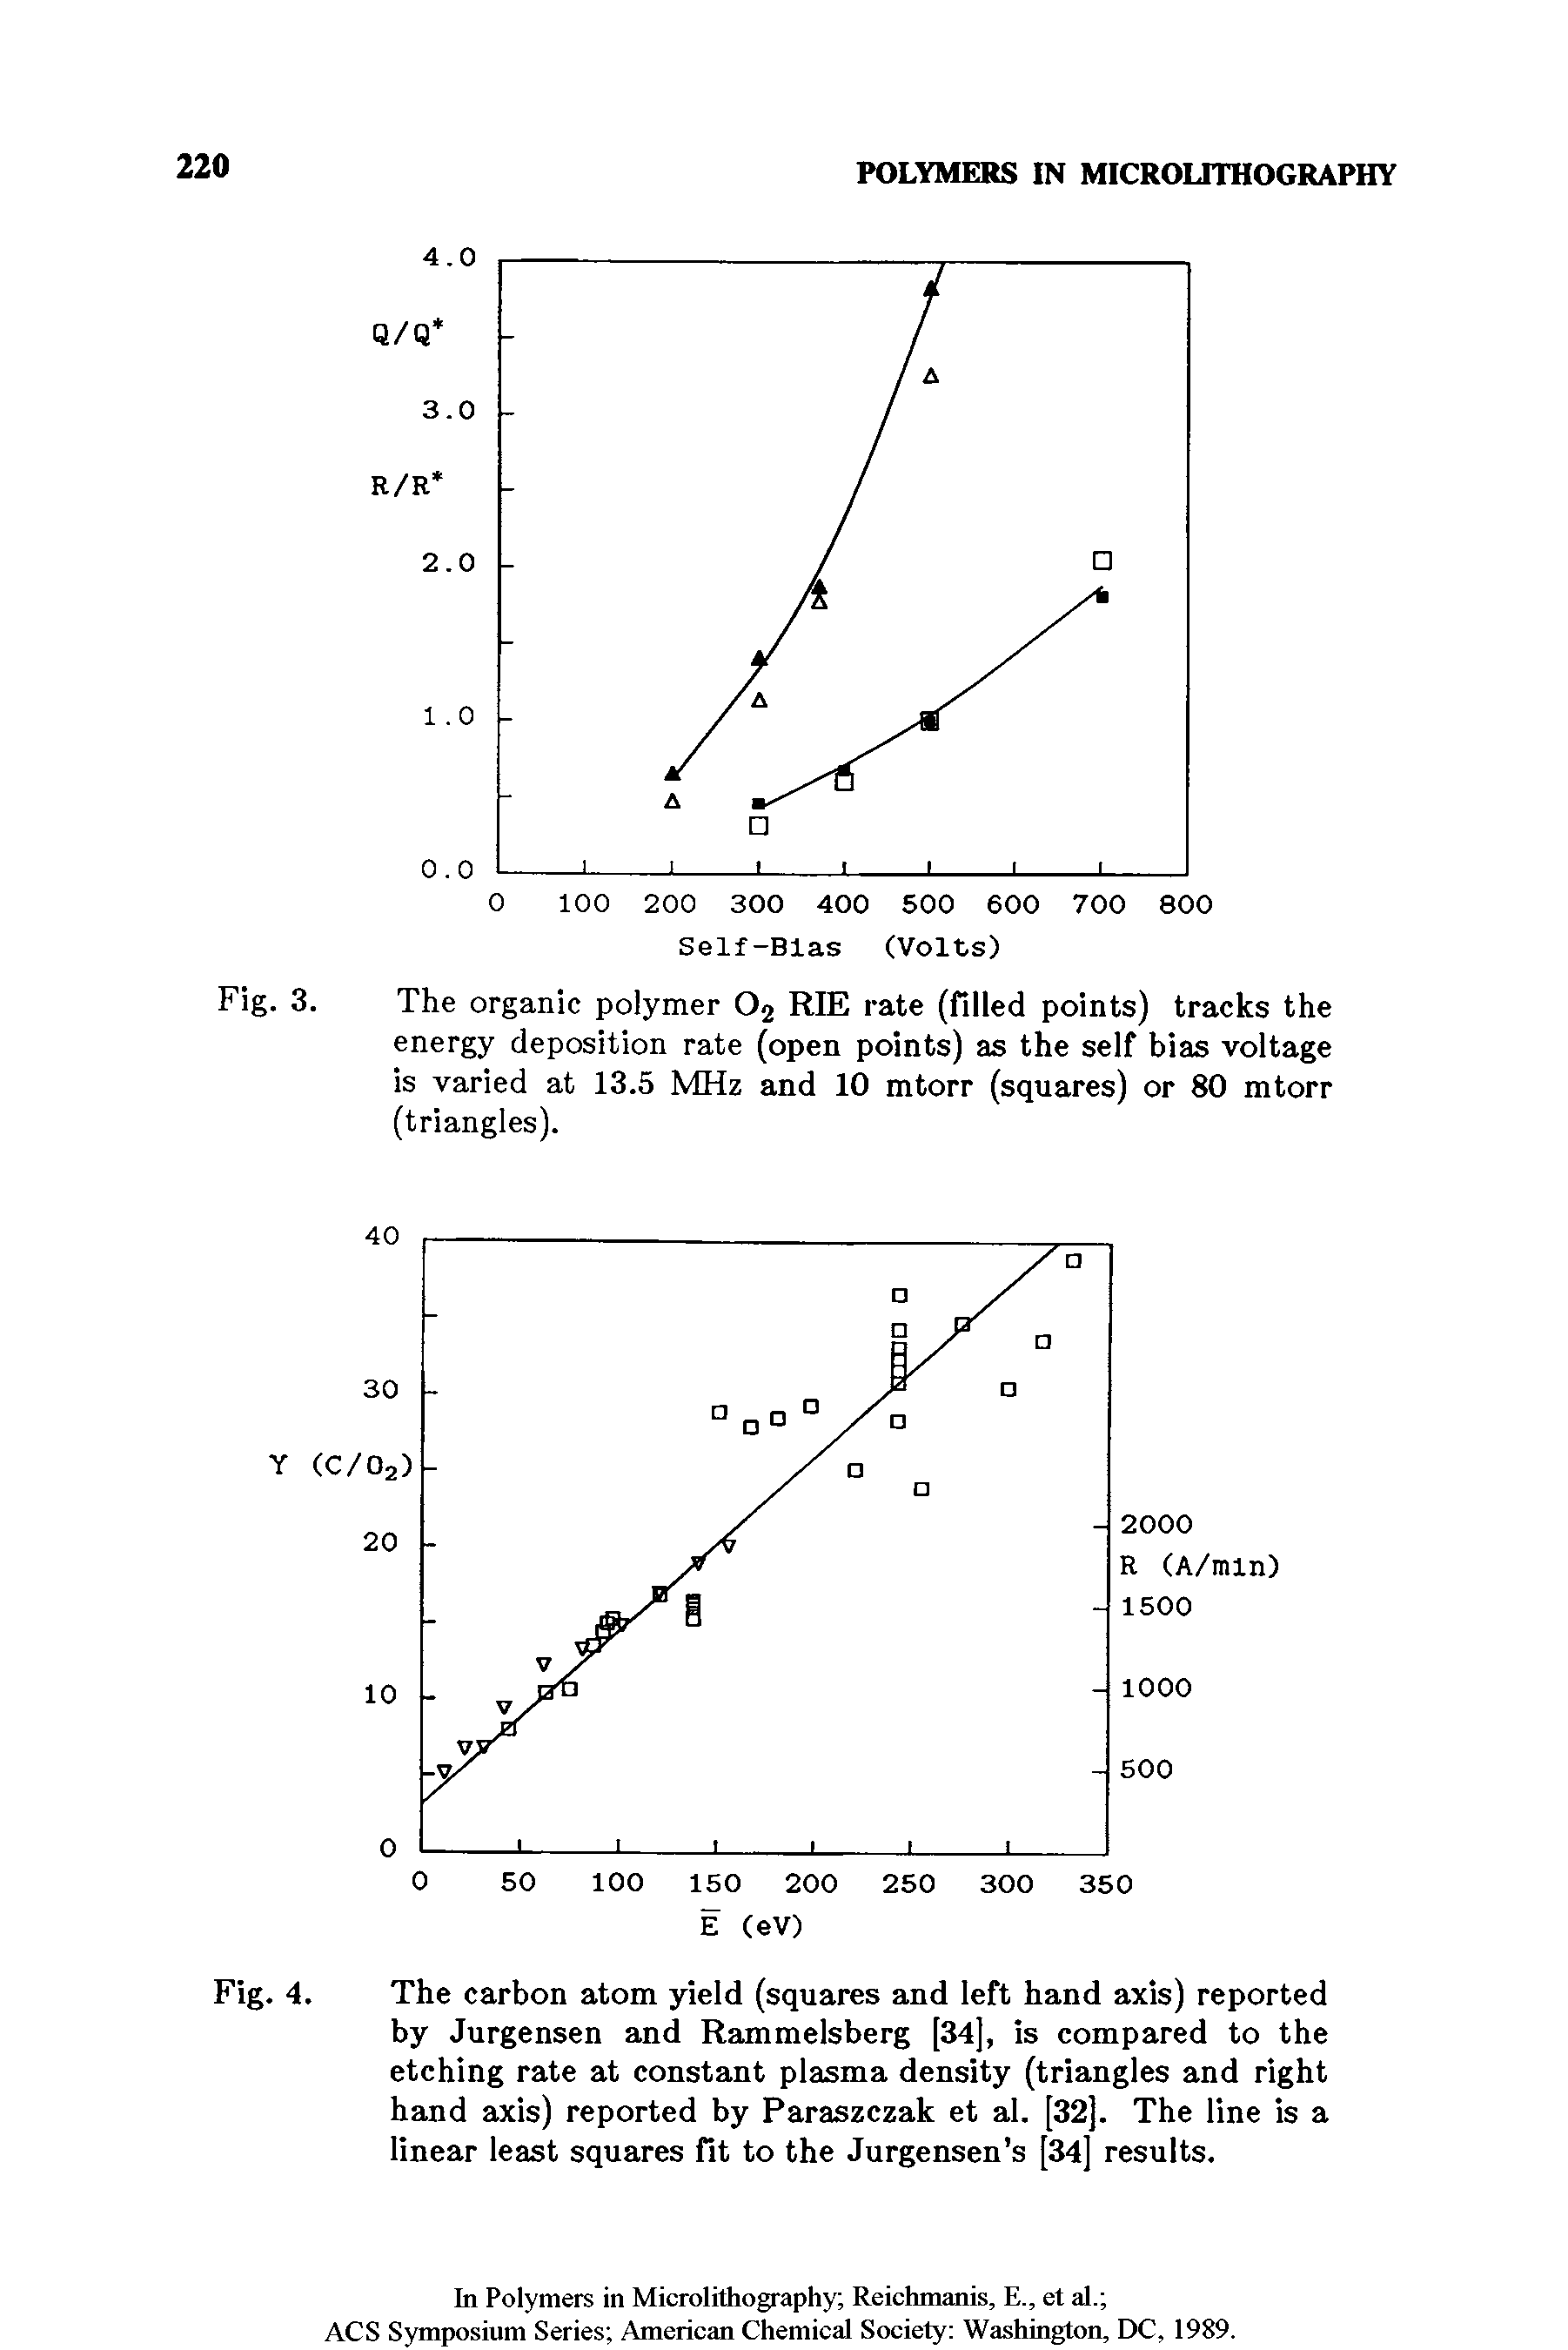 Fig. 4. The carbon atom yield (squares and left hand axis) reported by Jurgensen and Rammelsberg [34], is compared to the etching rate at constant plasma density (triangles and right hand axis) reported by Paraszczak et al. [32]. The line is a linear least squares fit to the Jurgensen s [34] results.